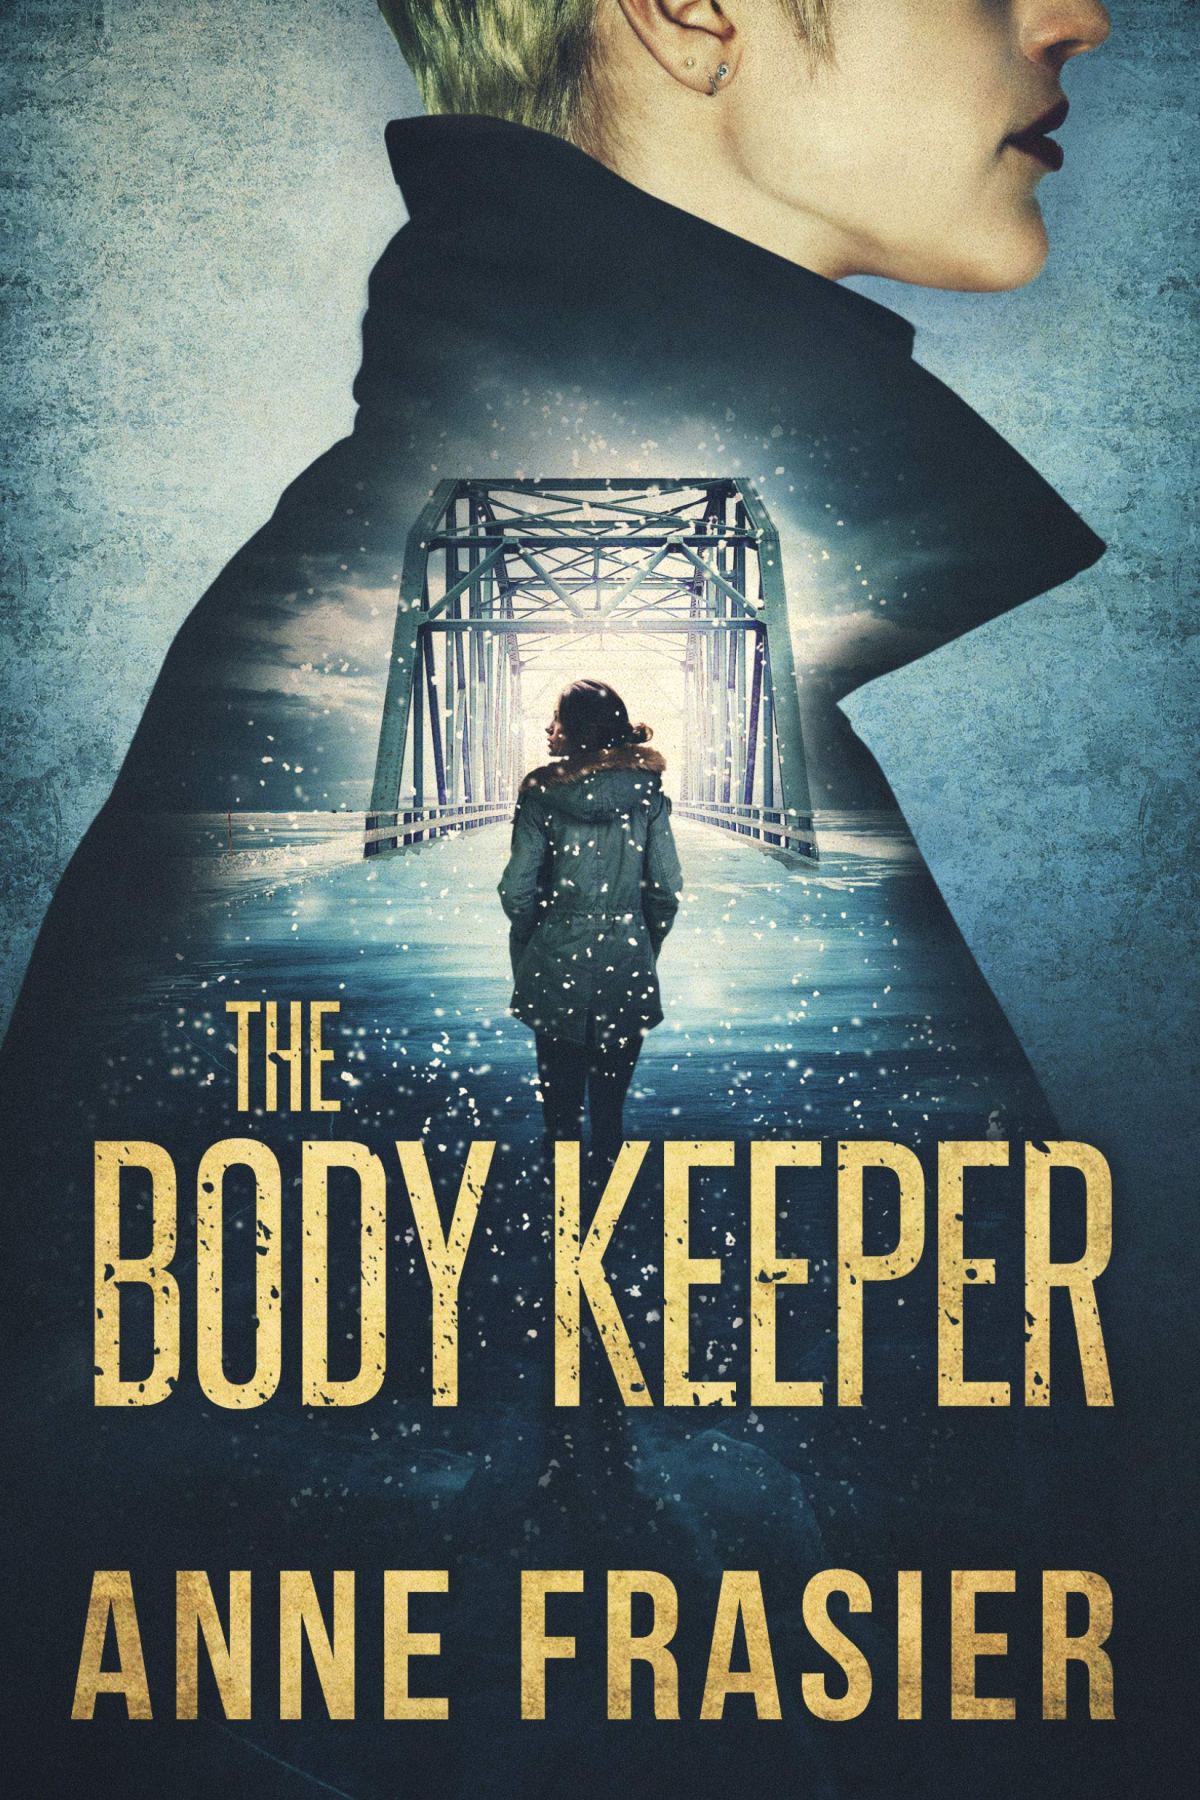 Book 151 – The Body Keeper by Anne Frasier